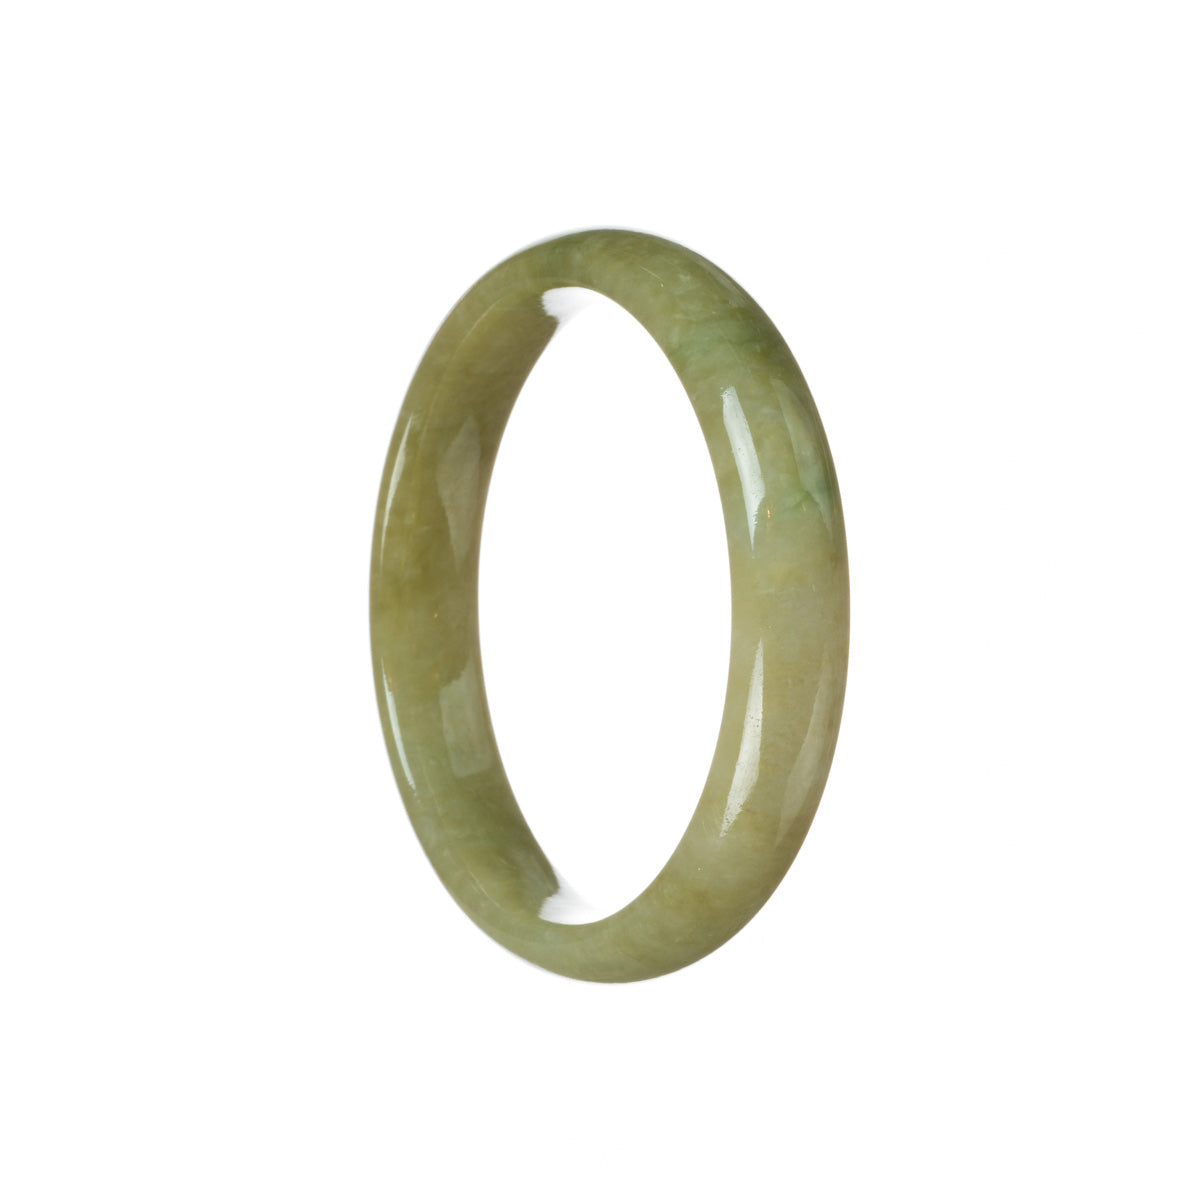 A close-up image of a real untreated brownish olive green jadeite bangle. The bangle is in the shape of a half moon and measures 59mm in diameter. It is being sold by MAYS GEMS.